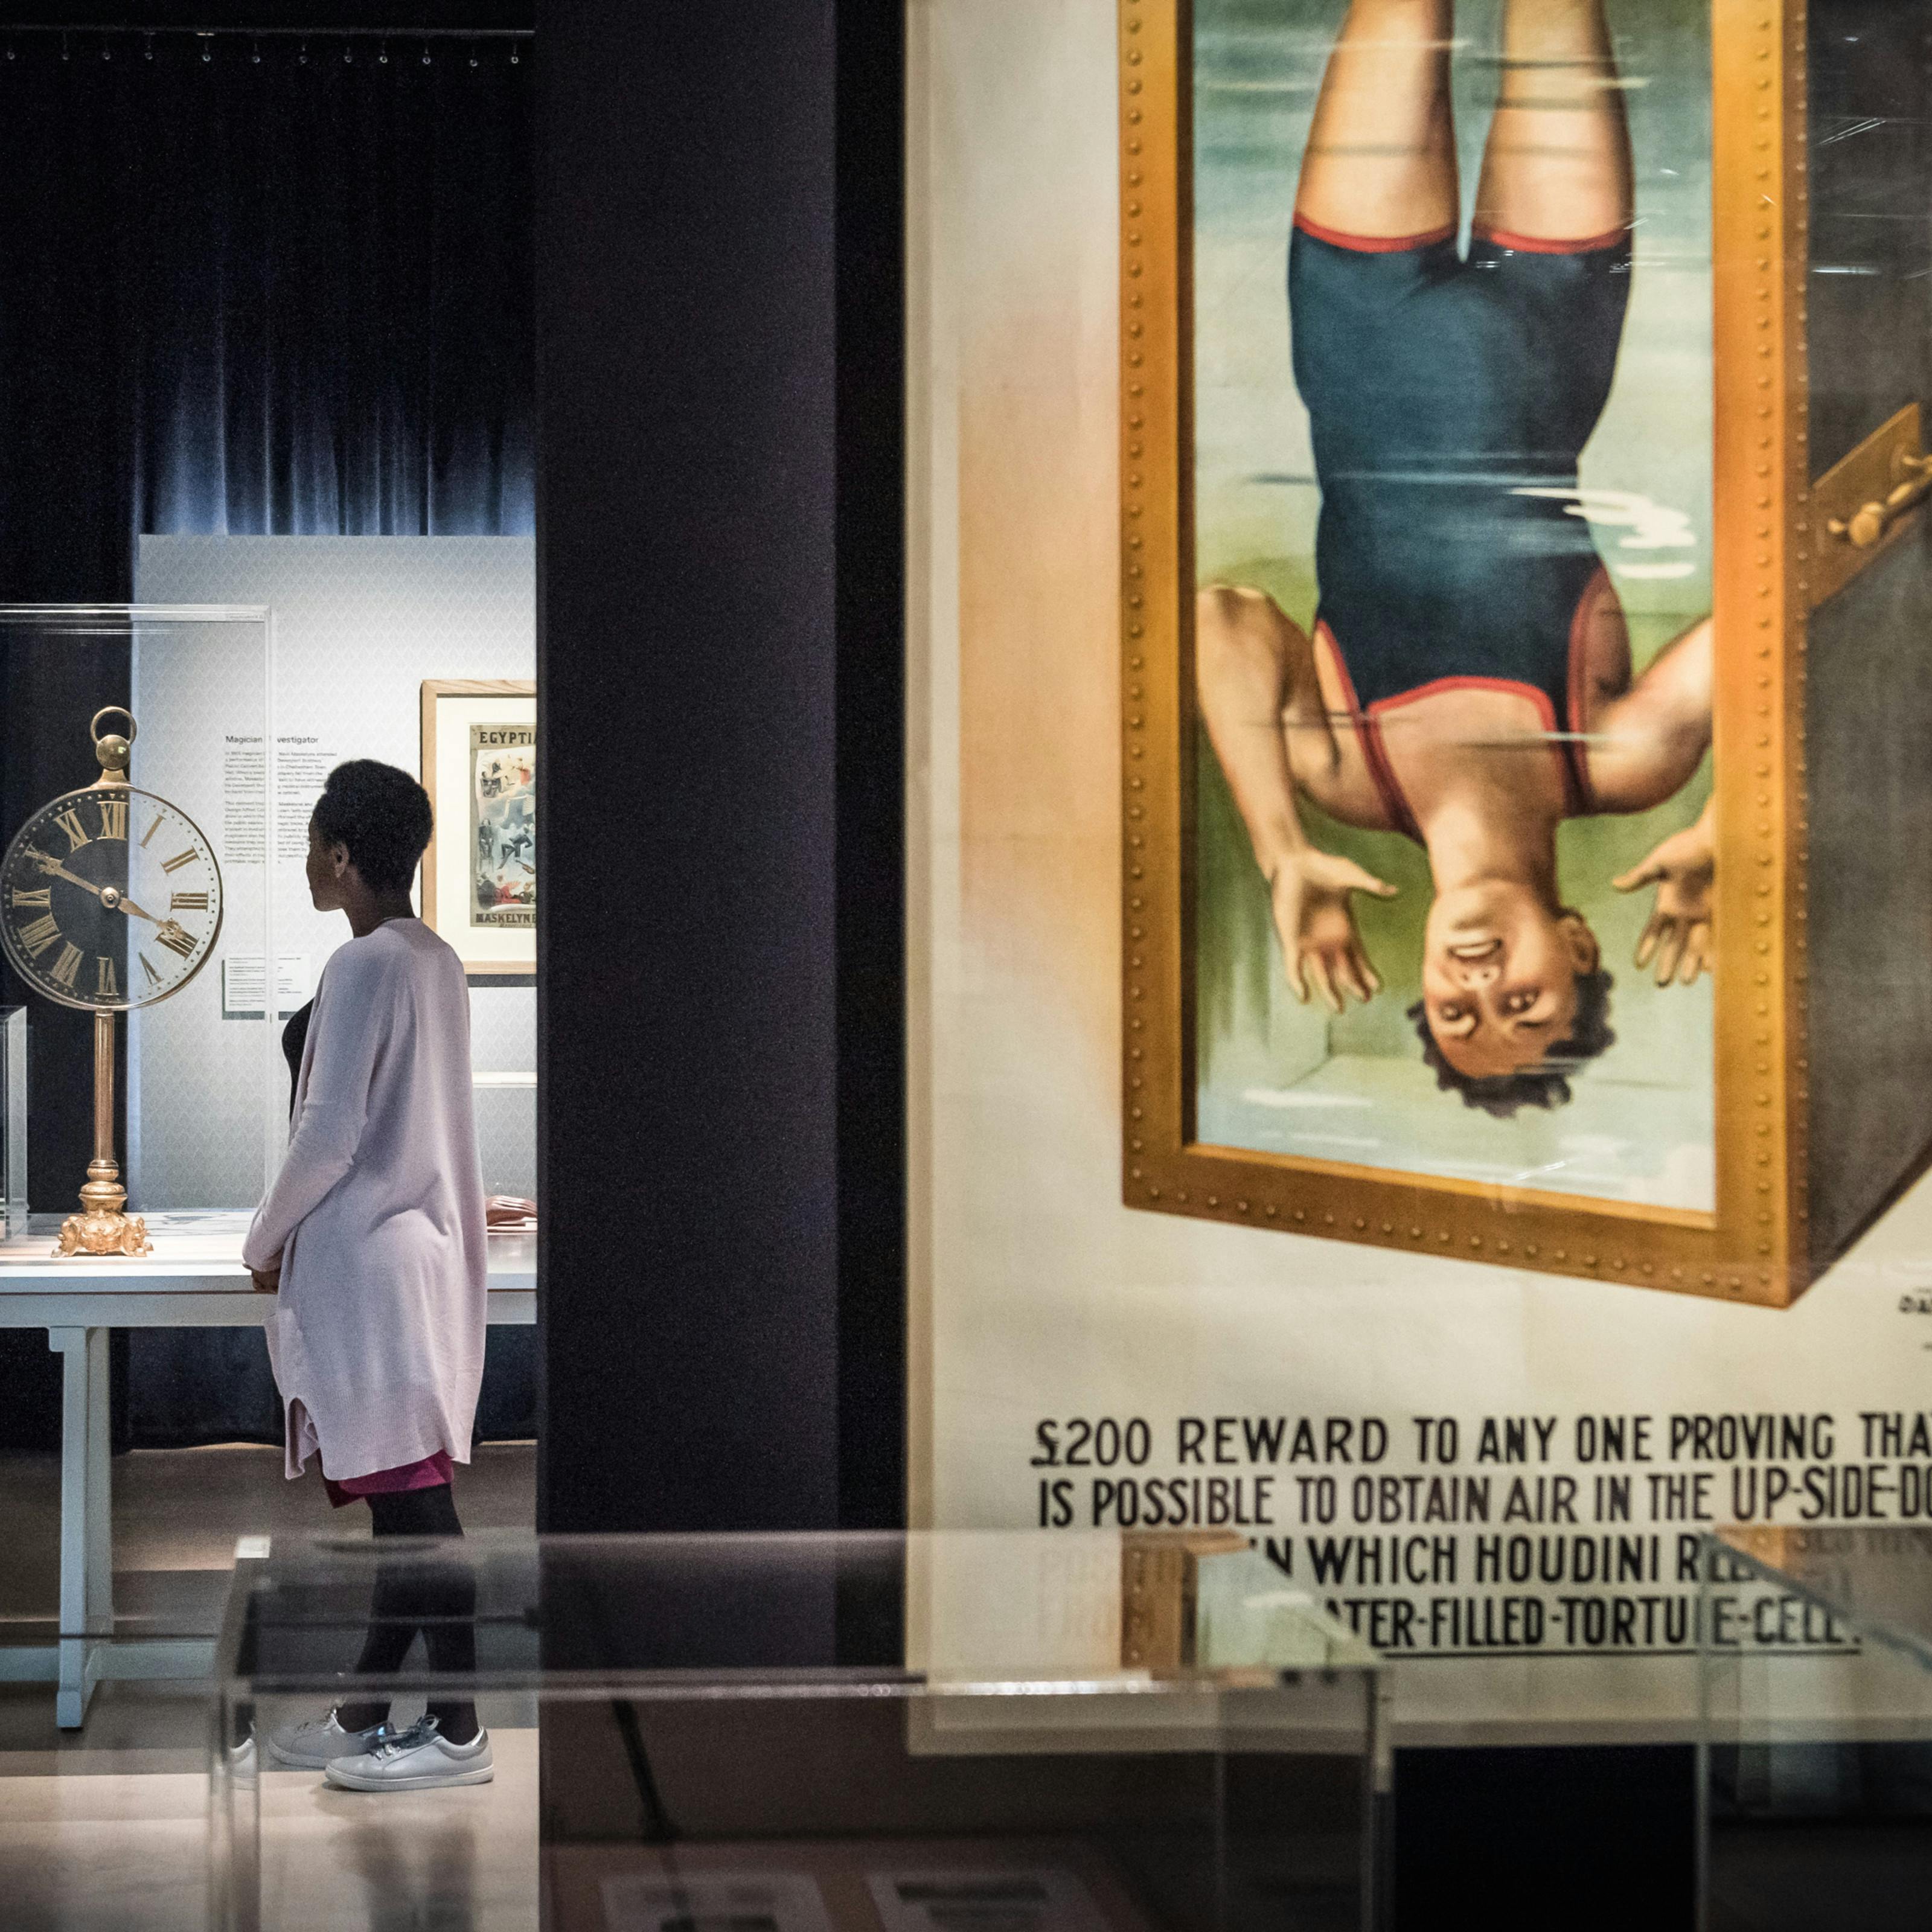 Photograph of a visitor exploring the exhibition, Smoke and Mirrors at Wellcome Collection. Photograph shows a women in the background looking at an object in a display case. In the foreground is a large colourful poster showing a man in a Victorian swimming costume suspended upside down in a tank of water.